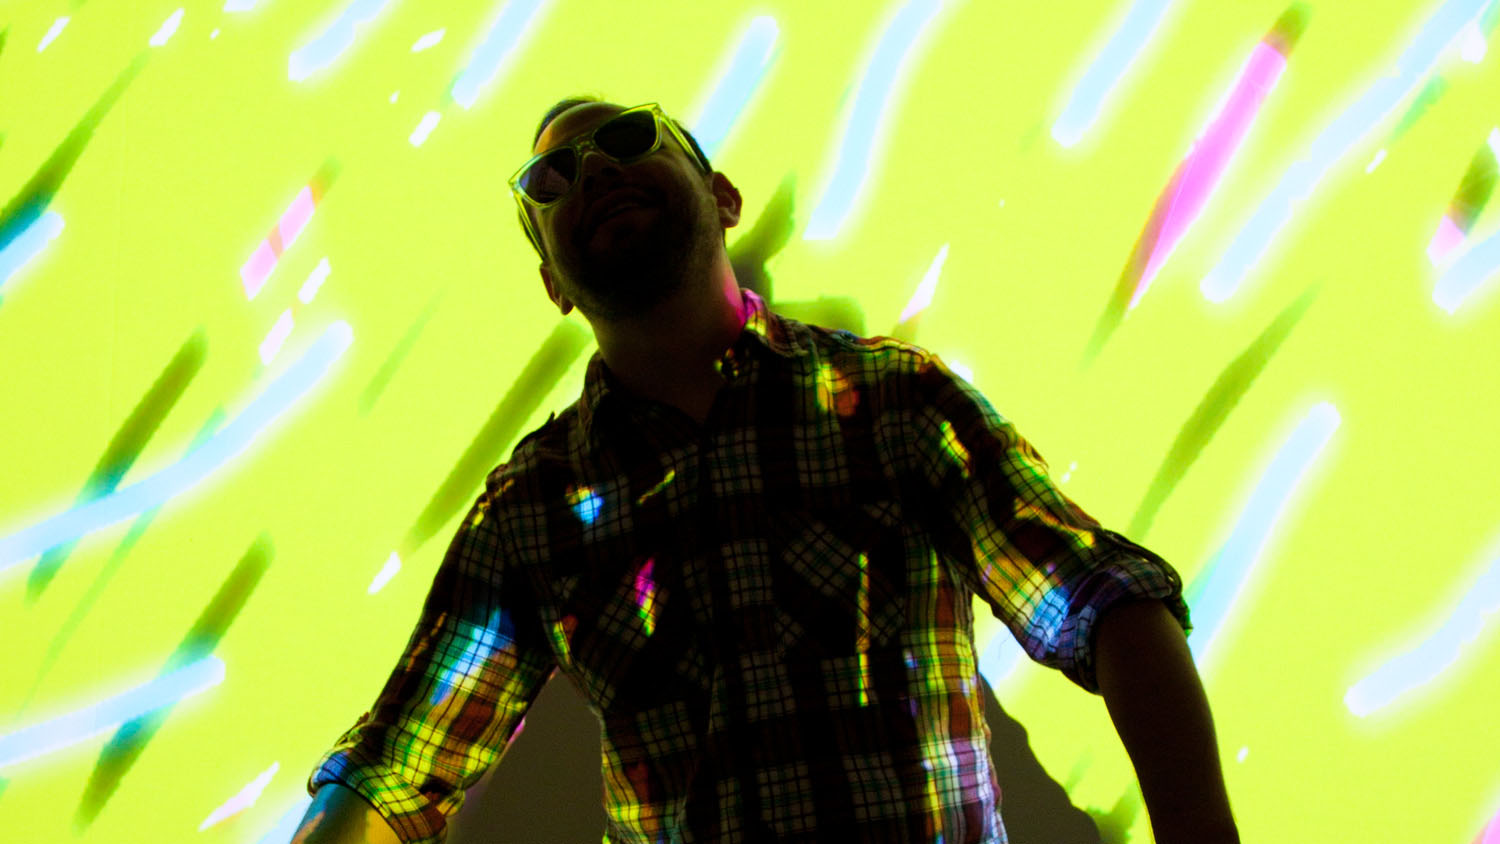 Lightpainting - draw on your friends with digital color and light